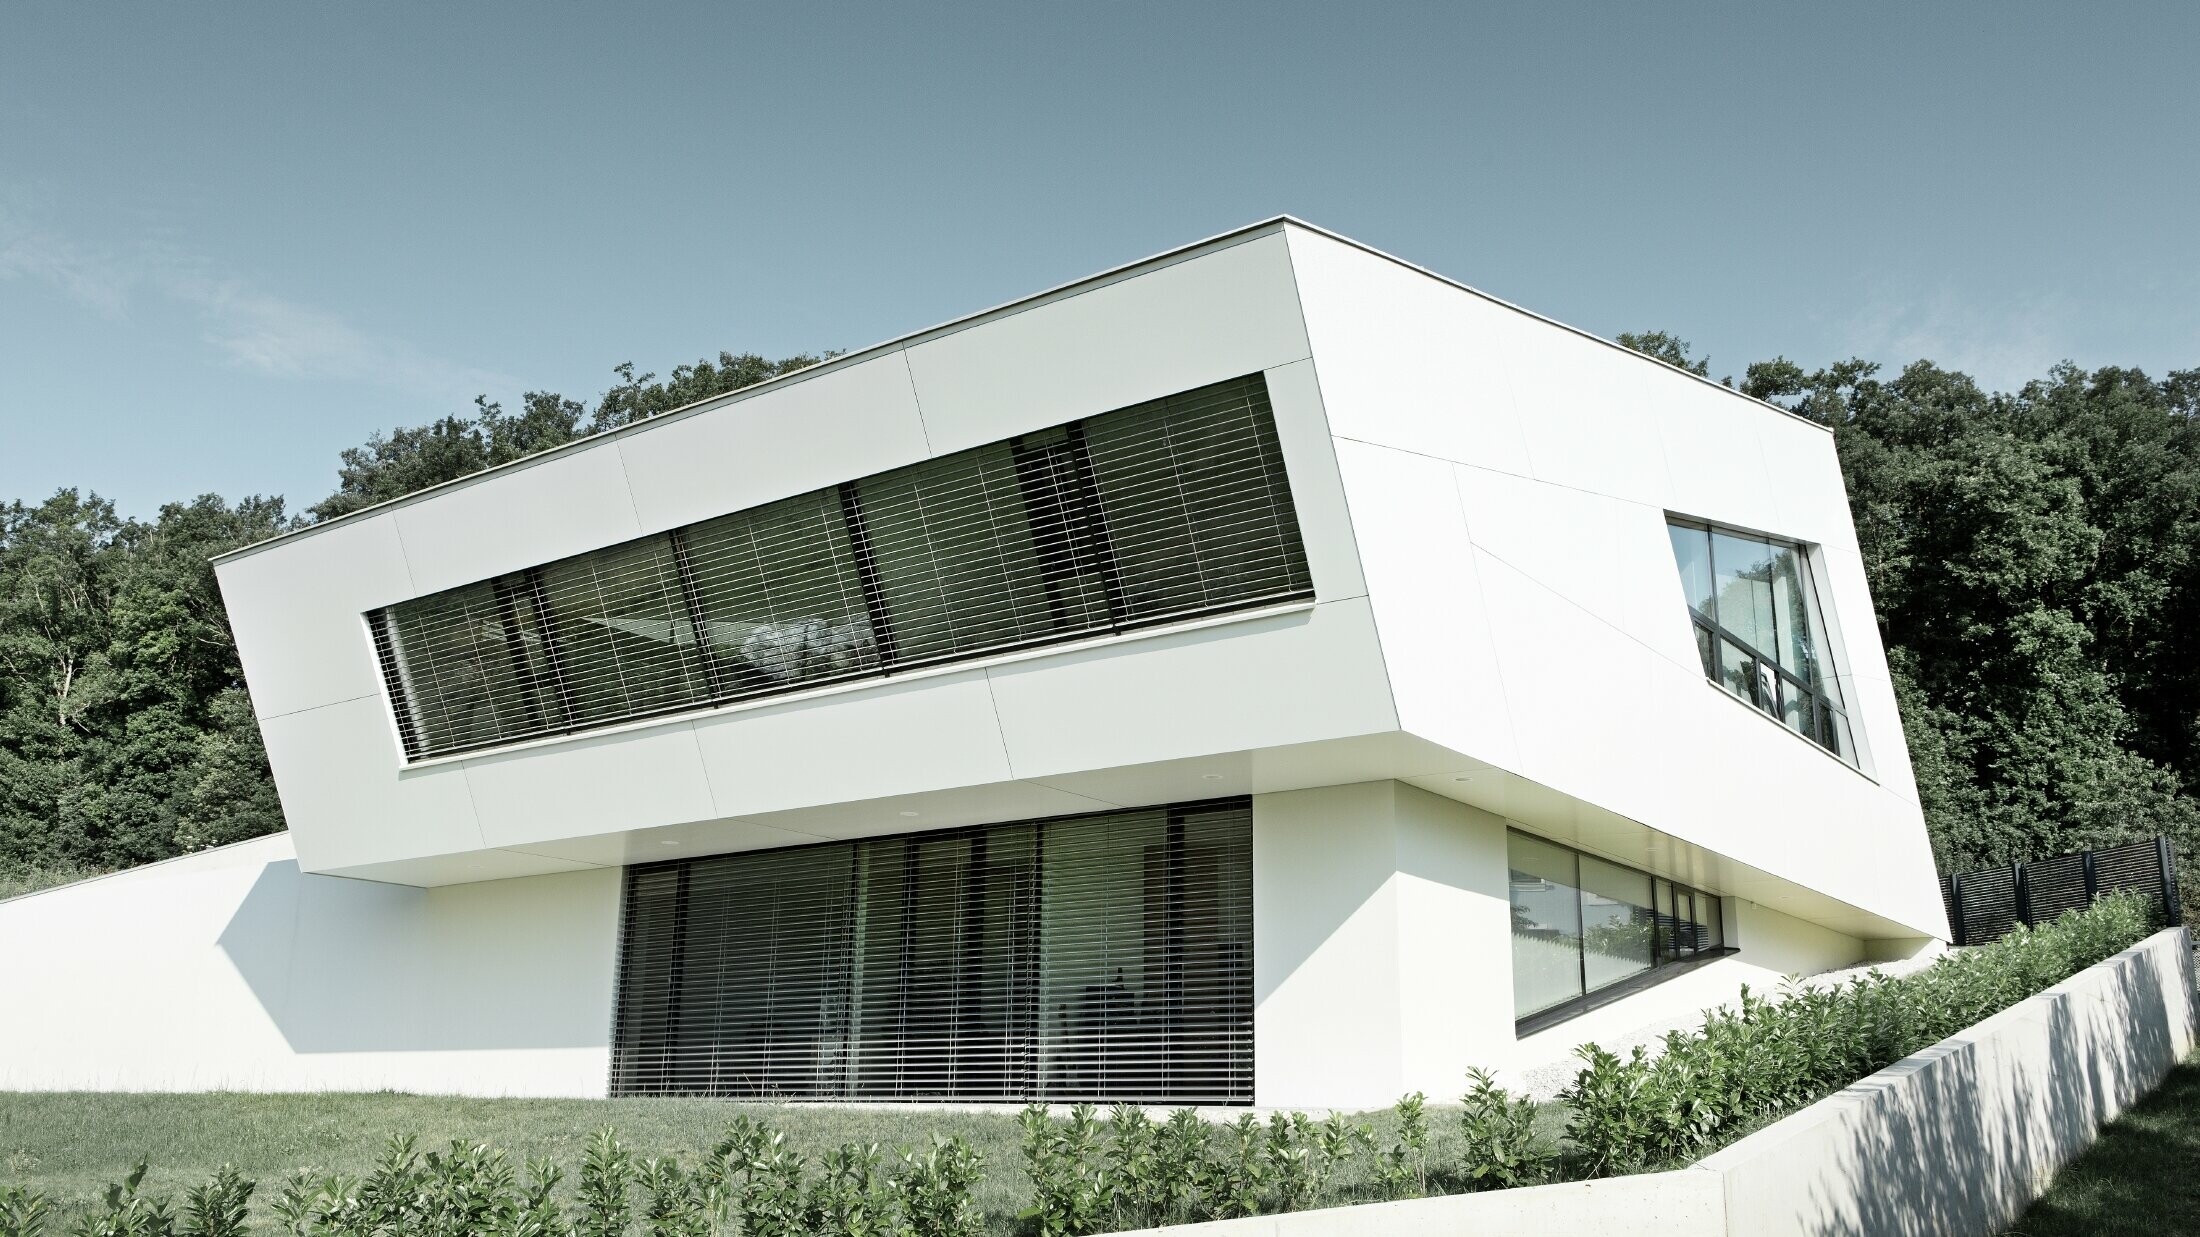 Very modern detached house with a white PREFA composite panel façade and large windows